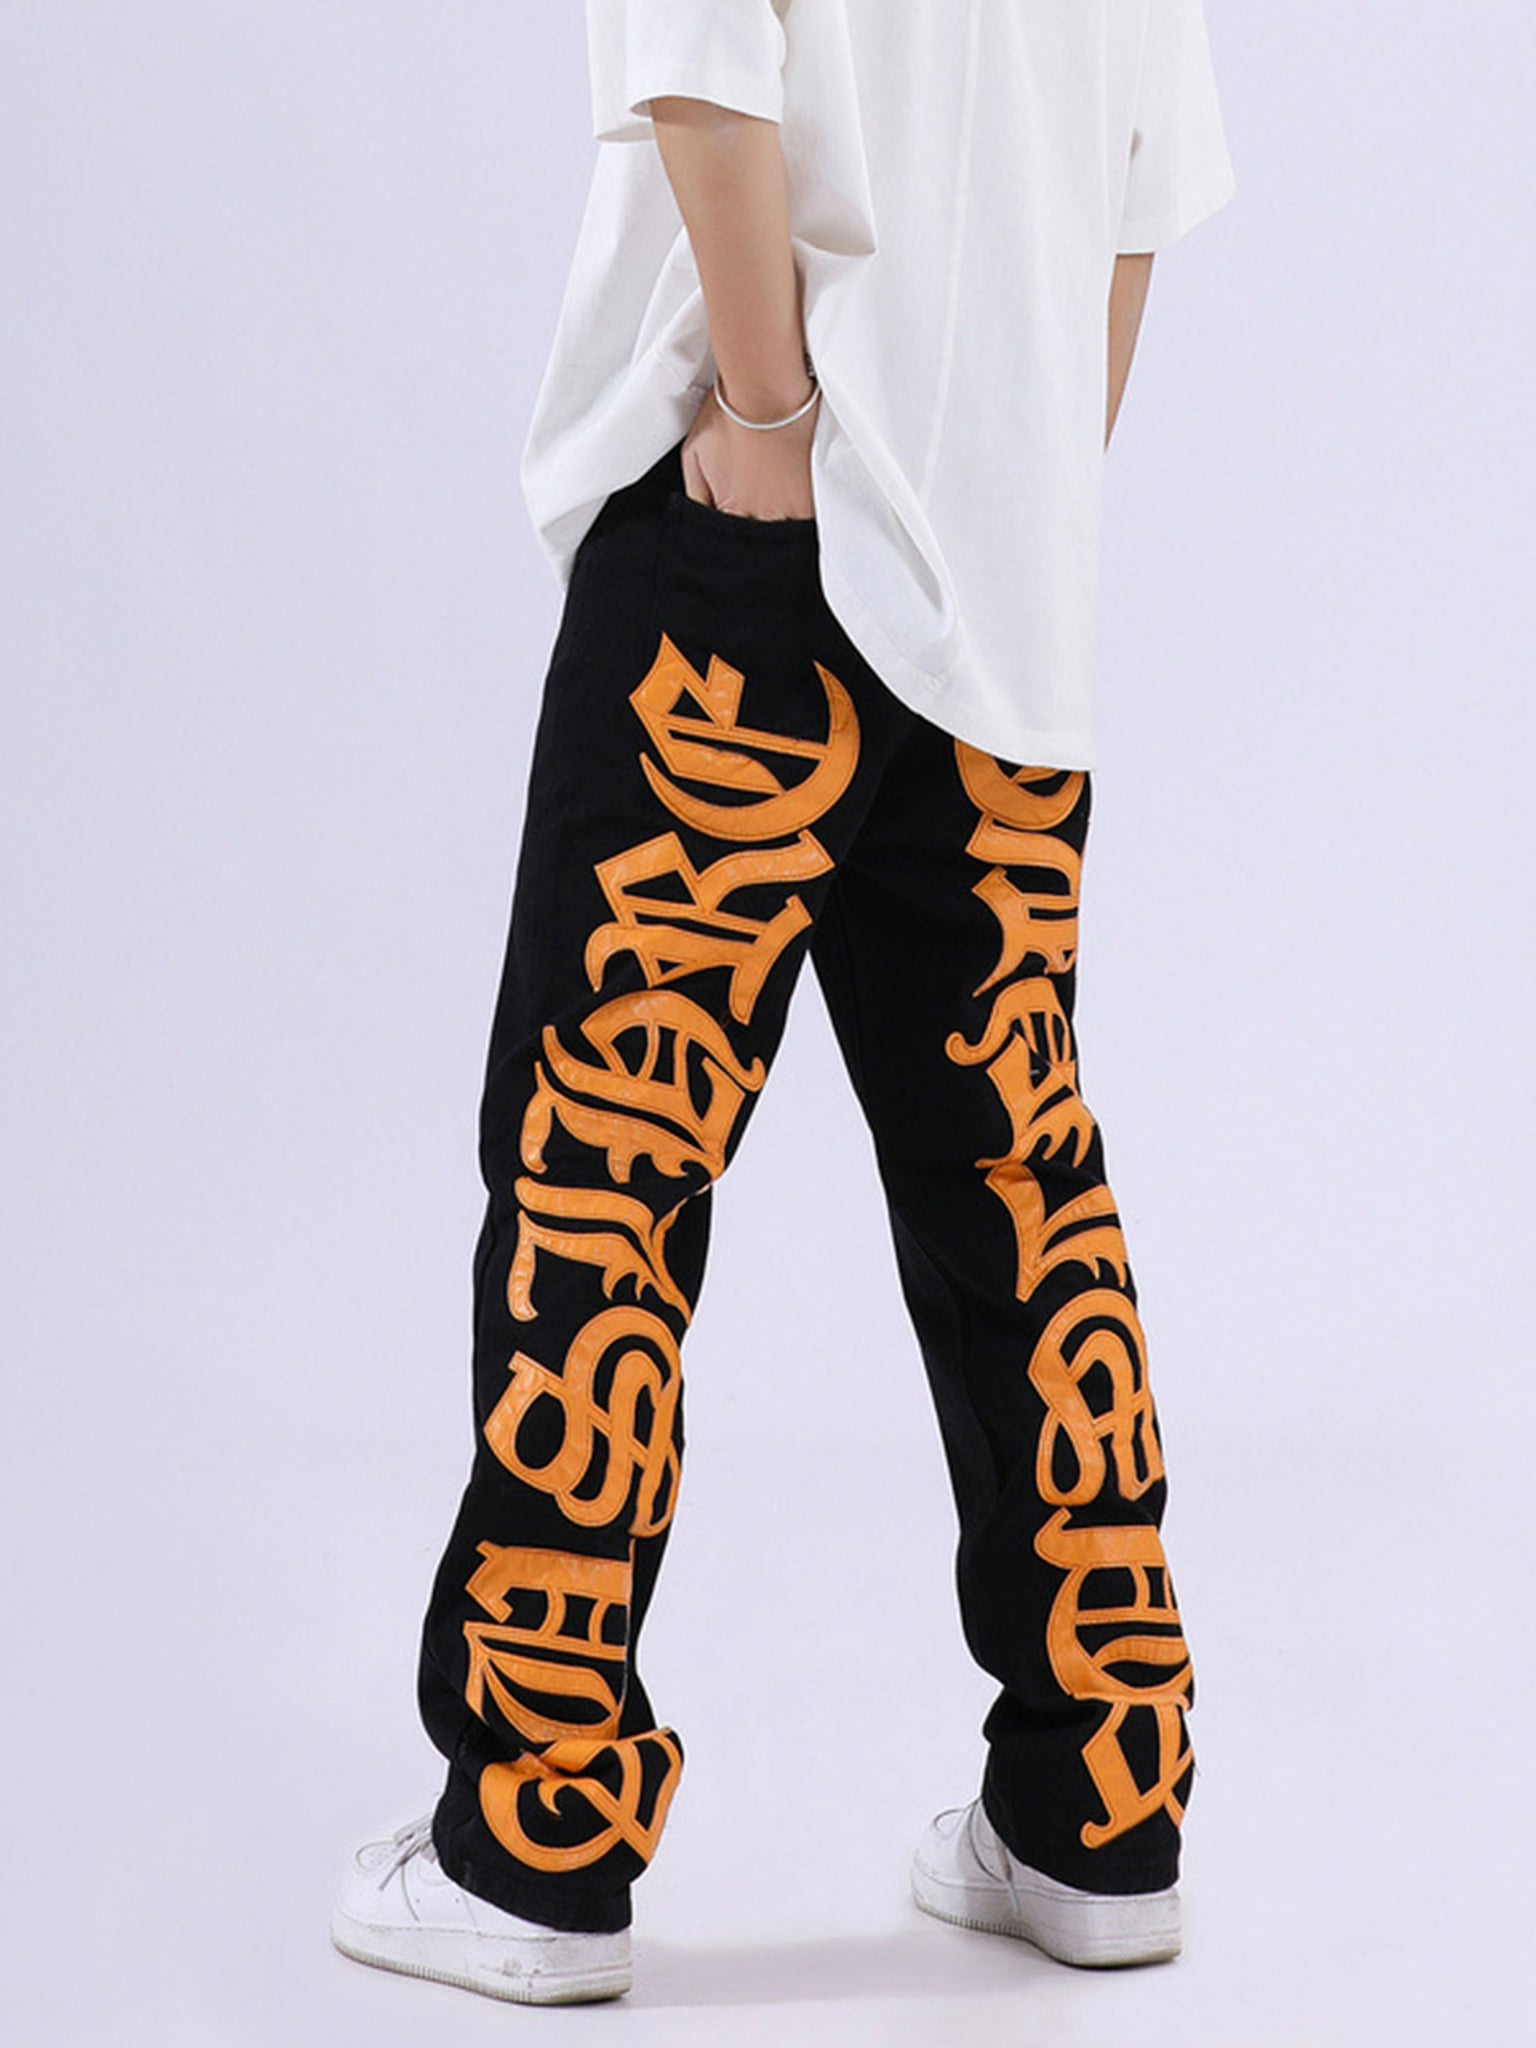 The Supermade American High Street Burning Text Embroidered Letters Jeans -1478